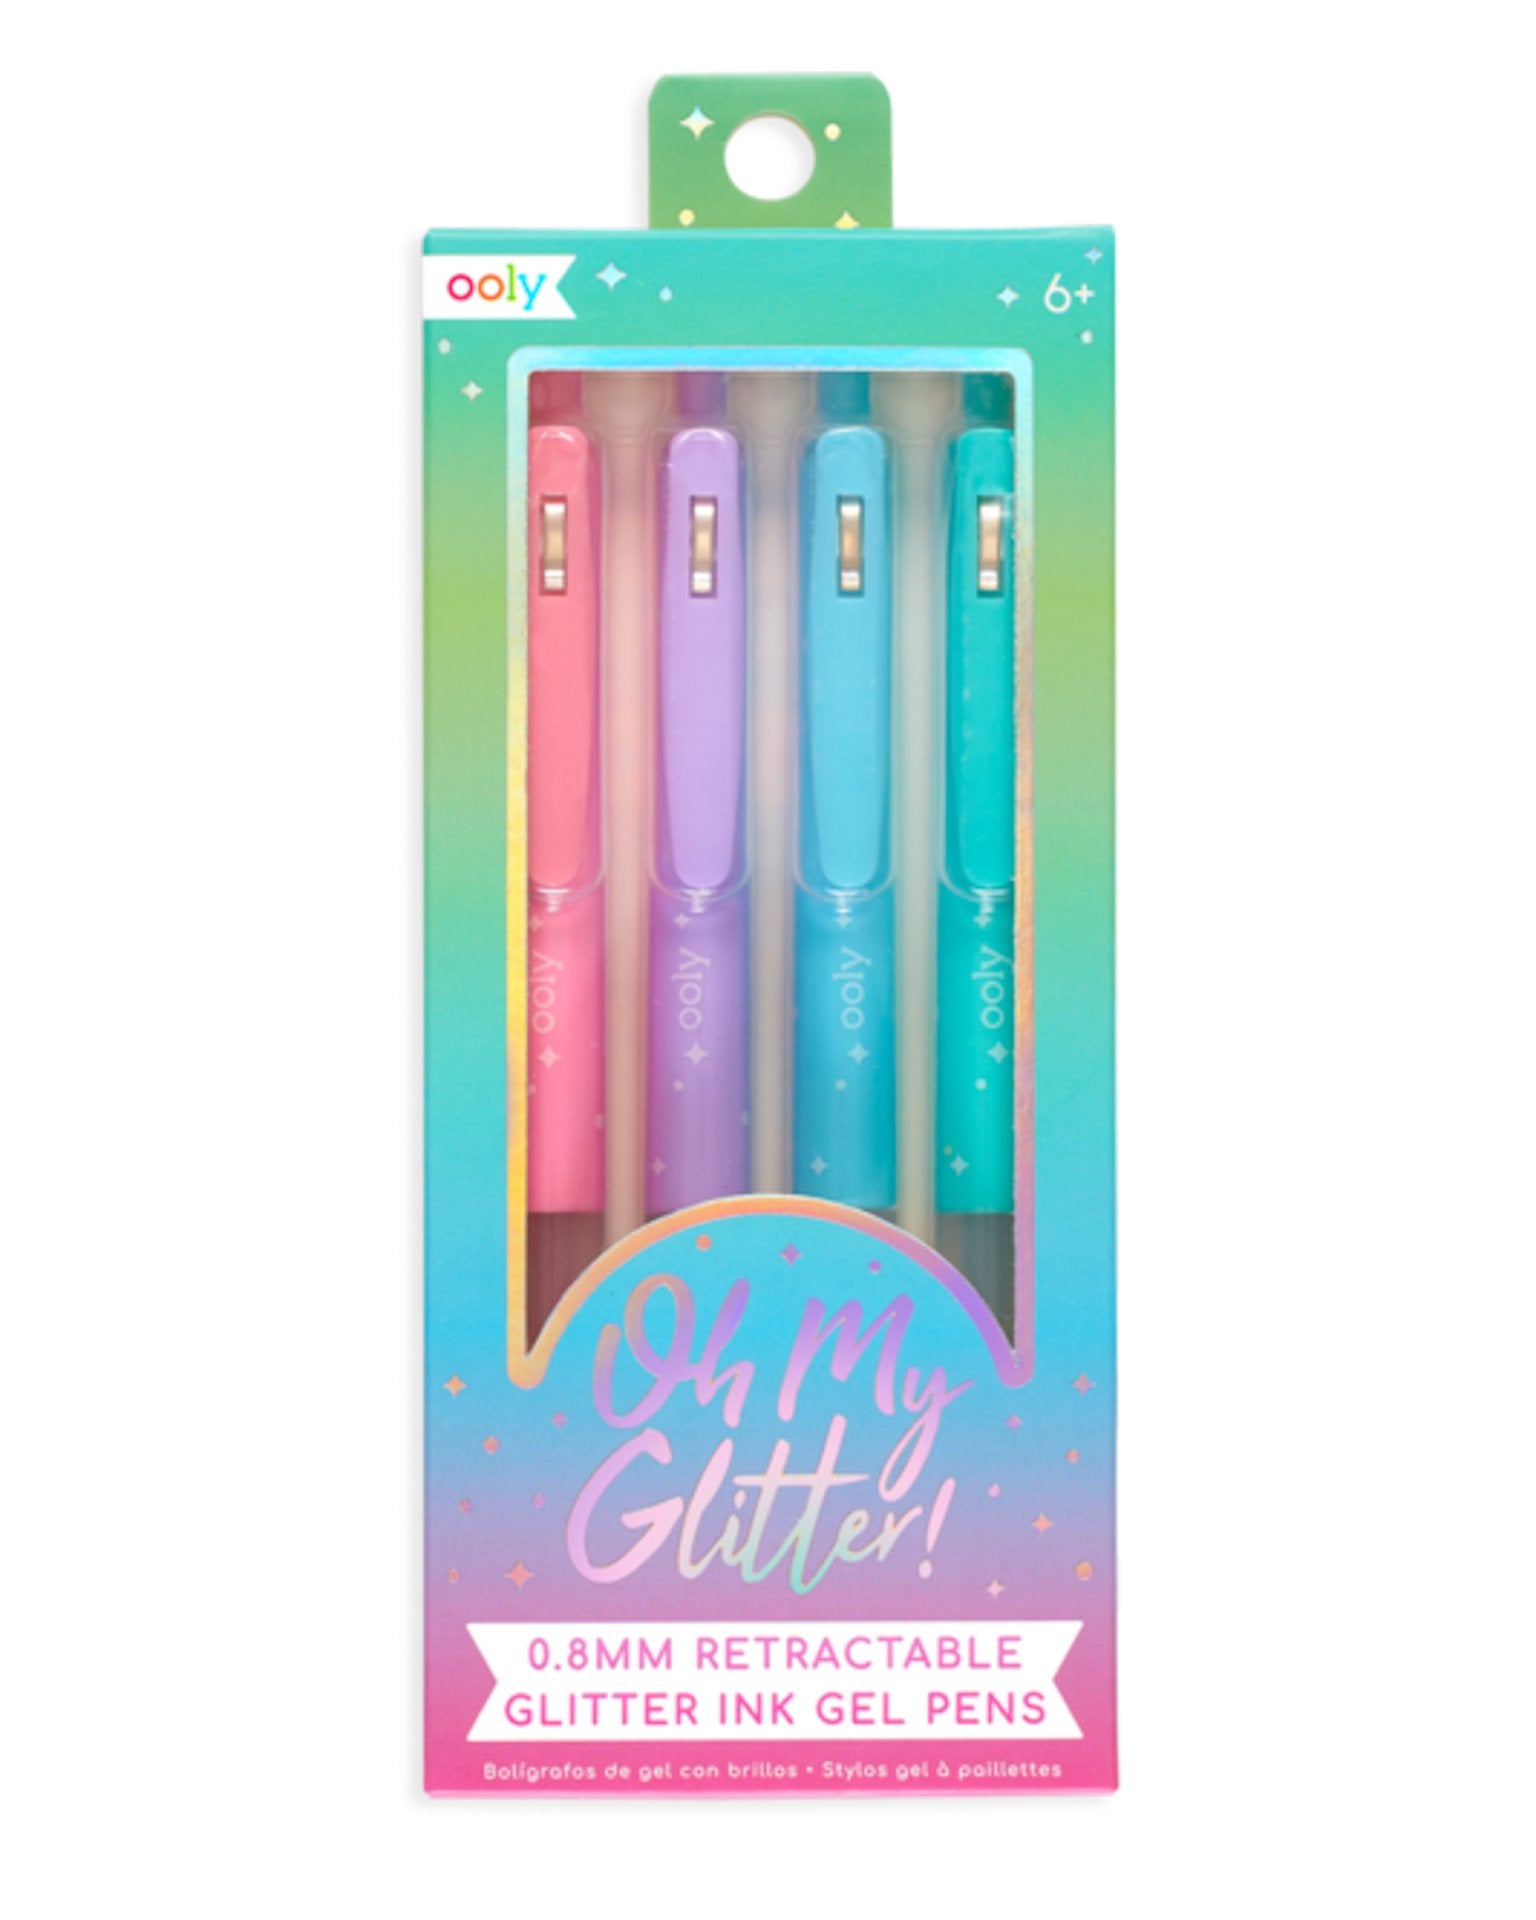 Little ooly play oh my glitter! gel pens set of 4